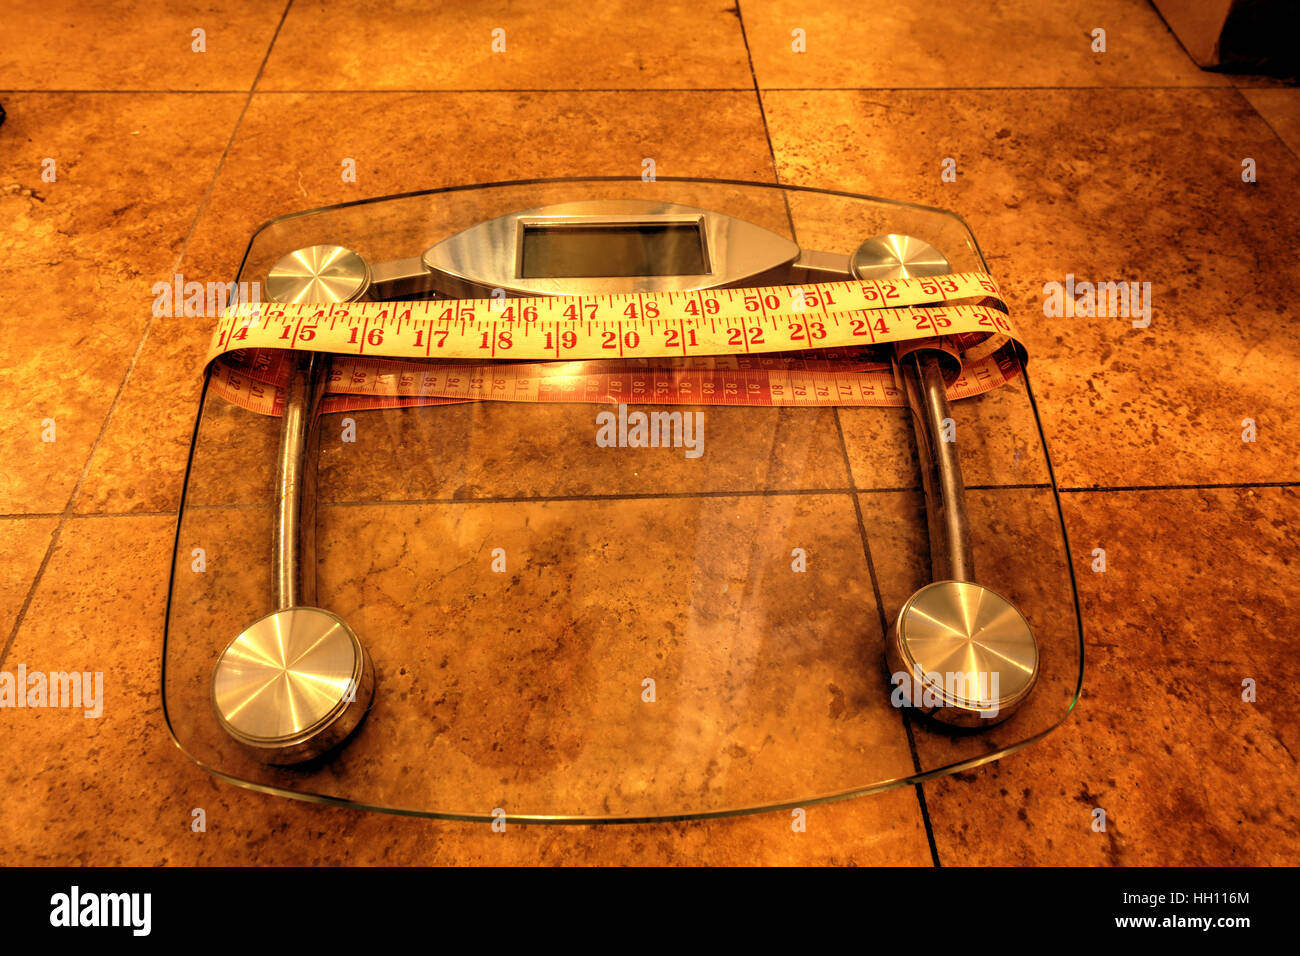 https://c8.alamy.com/comp/HH116M/scale-to-monitor-weight-with-a-measuring-tape-to-take-measurements-HH116M.jpg